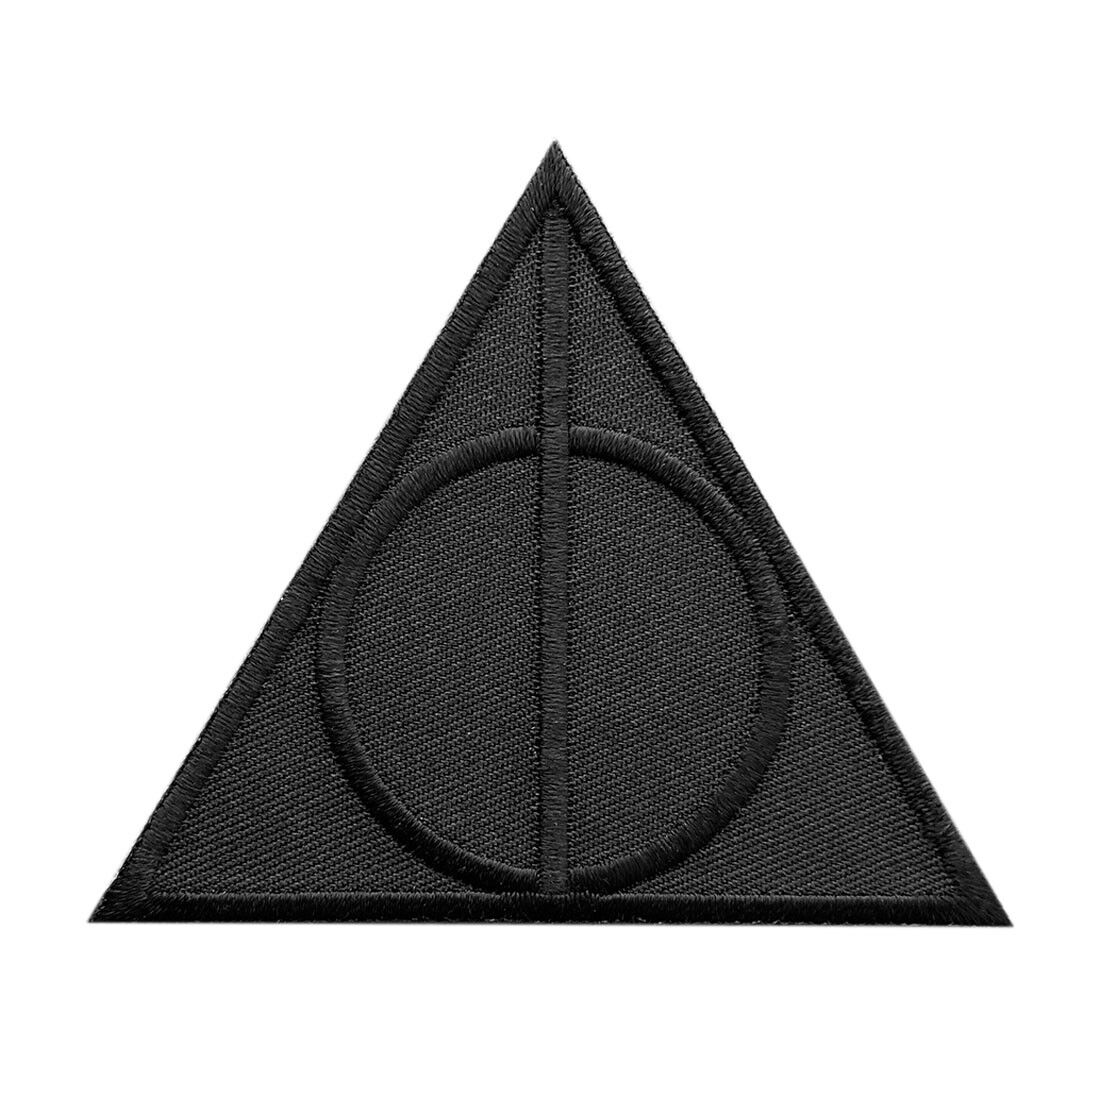 Harry Potter Deathly Hallows Logo Max 68% OFF Boston Mall Iron on 3.0 Halloween Patch X